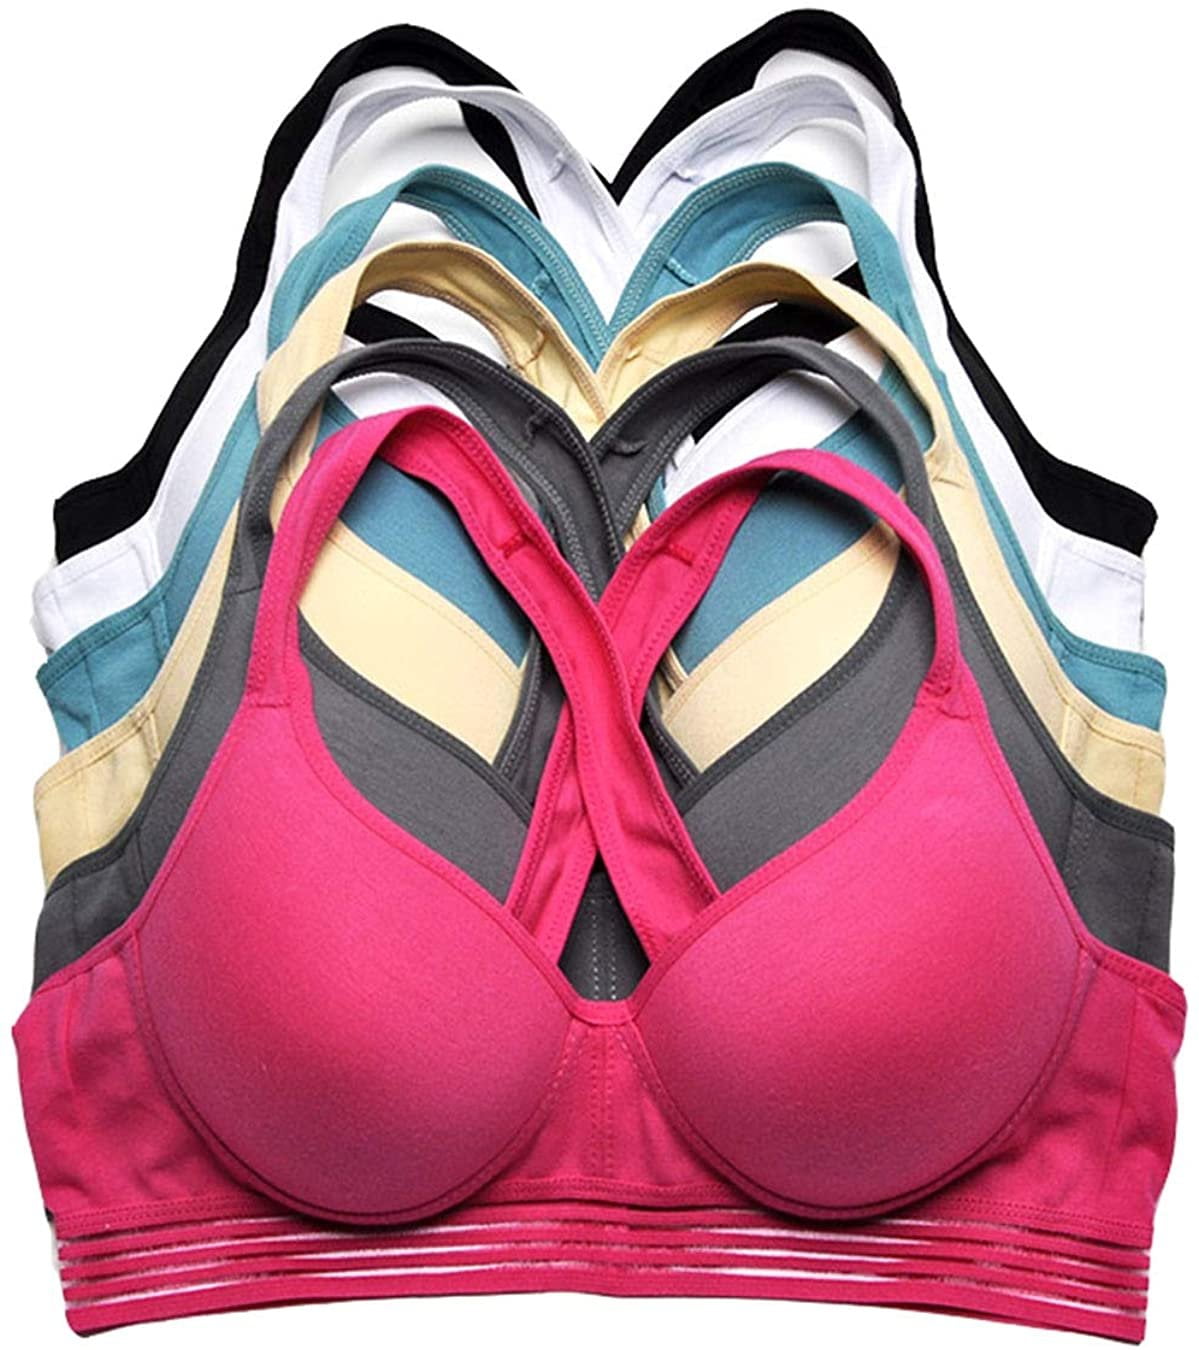 3 or 6 Women's SPORTS Bras Yoga RACER BACK Mold Cup Bra 6315 ACTIVE WEAR 32B-42D 